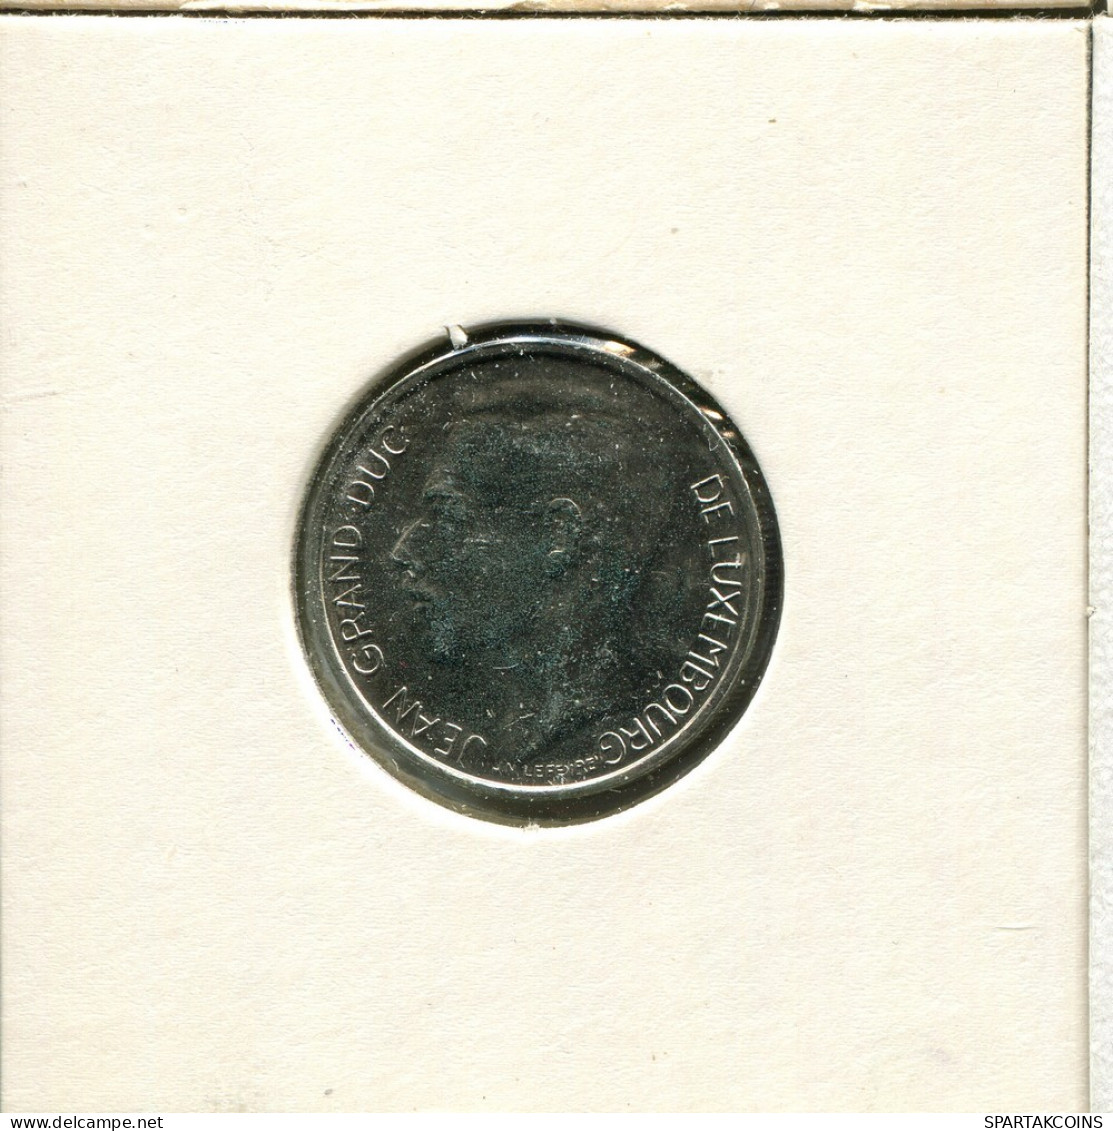 1 FRANC 1982 LUXEMBOURG Coin #AT218.U.A - Luxemburgo